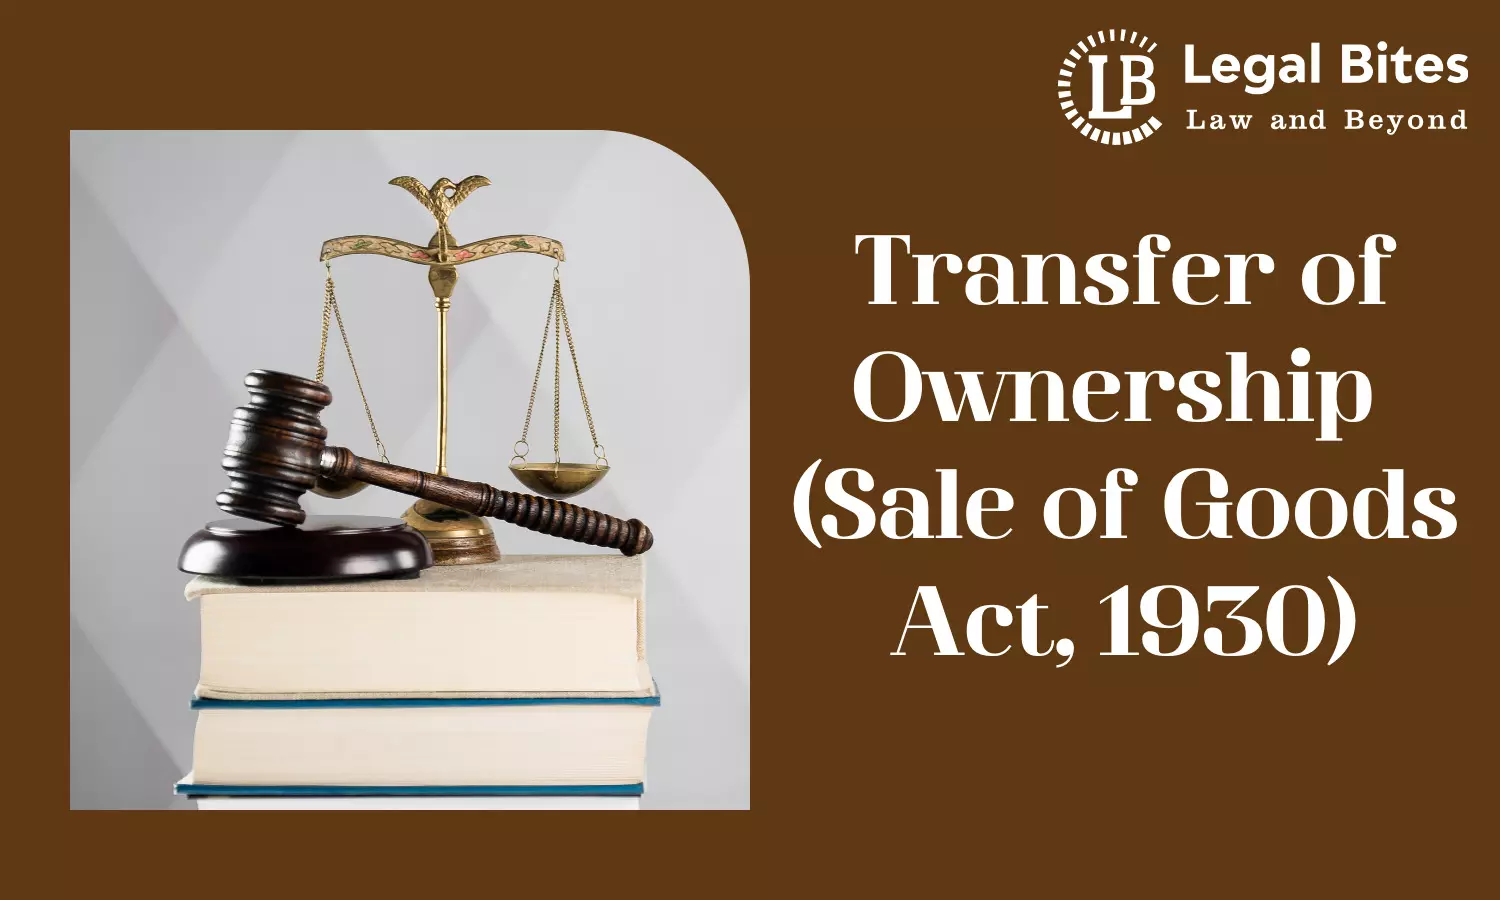 Transfer of Ownership | Sale of Goods Act, 1930